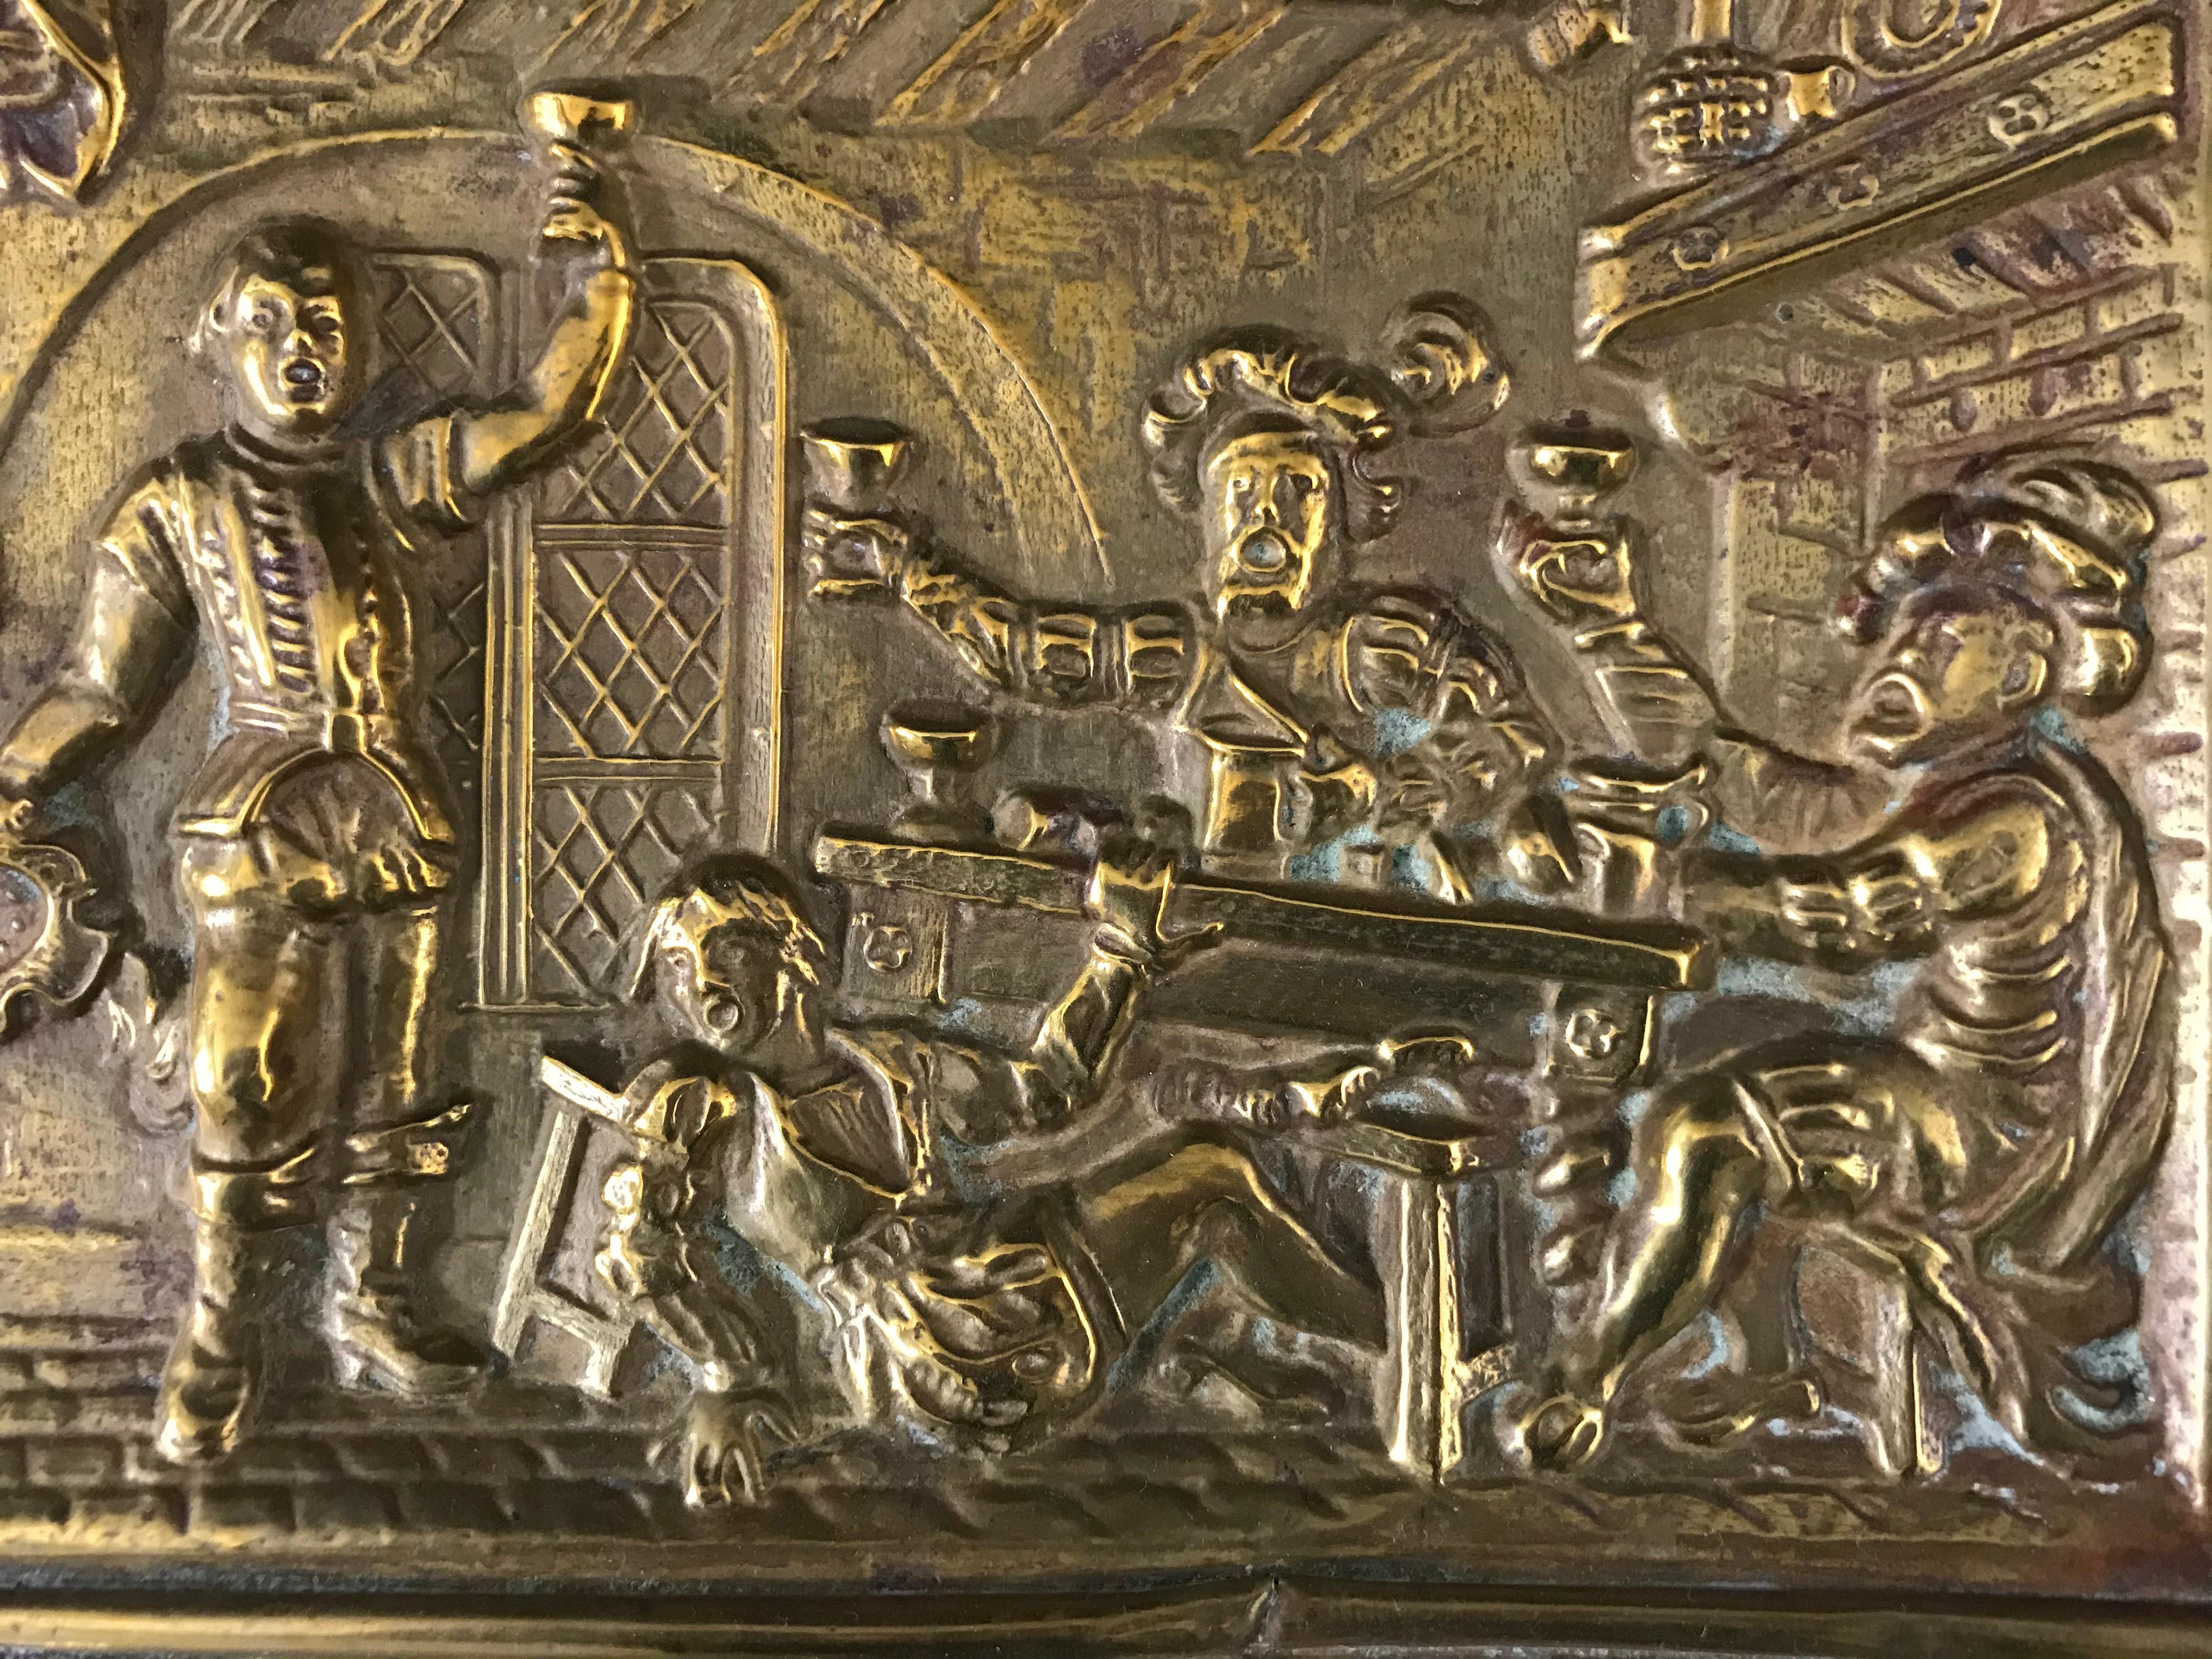 Pretty embossed copper plate representing a tavern scene in the style of the 16th century. In a renaissance interior four men are drinking, three of them lift their cups, the fourth, visibly drunk, has fallen from his seat. A maid enters the room